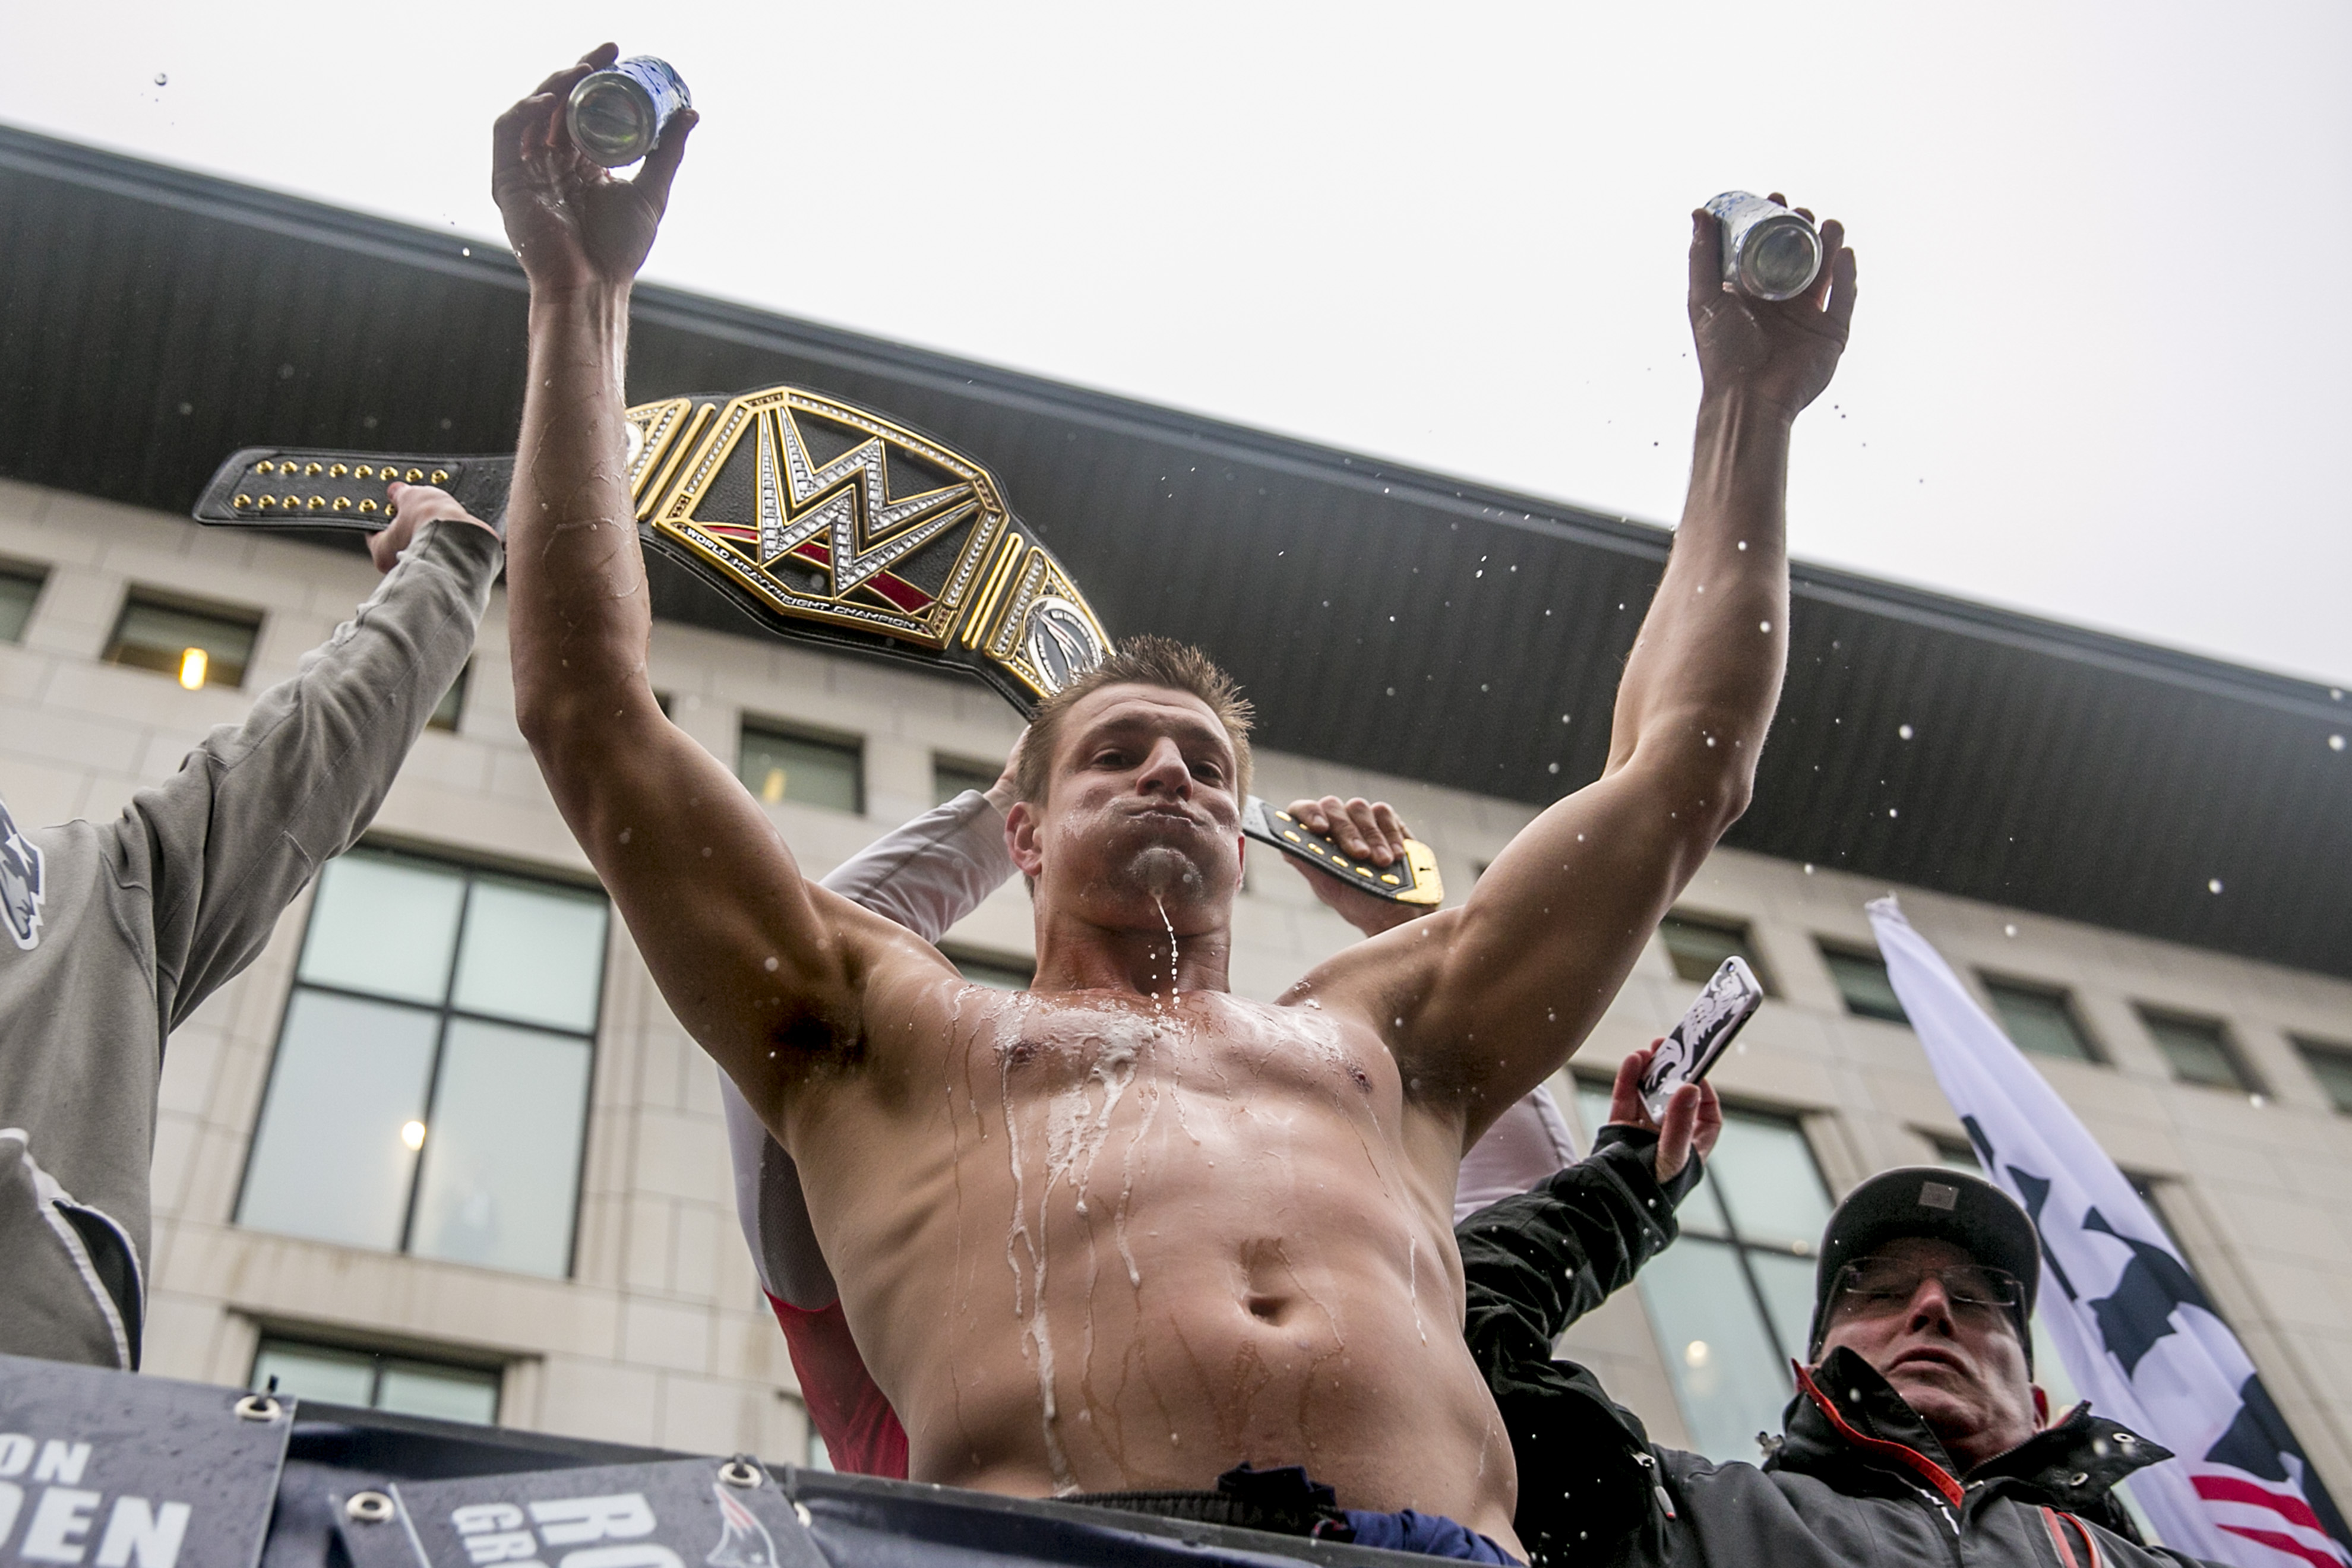 BOSTON, MA - FEBRUARY 07: Rob Gronkowski of the New England Patriots celebrates during the Super Bowl victory parade on February 7, 2017 in Boston, Massachusetts. The Patriots defeated the Atlanta Falcons 34-28 in overtime in Super Bowl 51. (Photo by Billie Weiss/Getty Images)